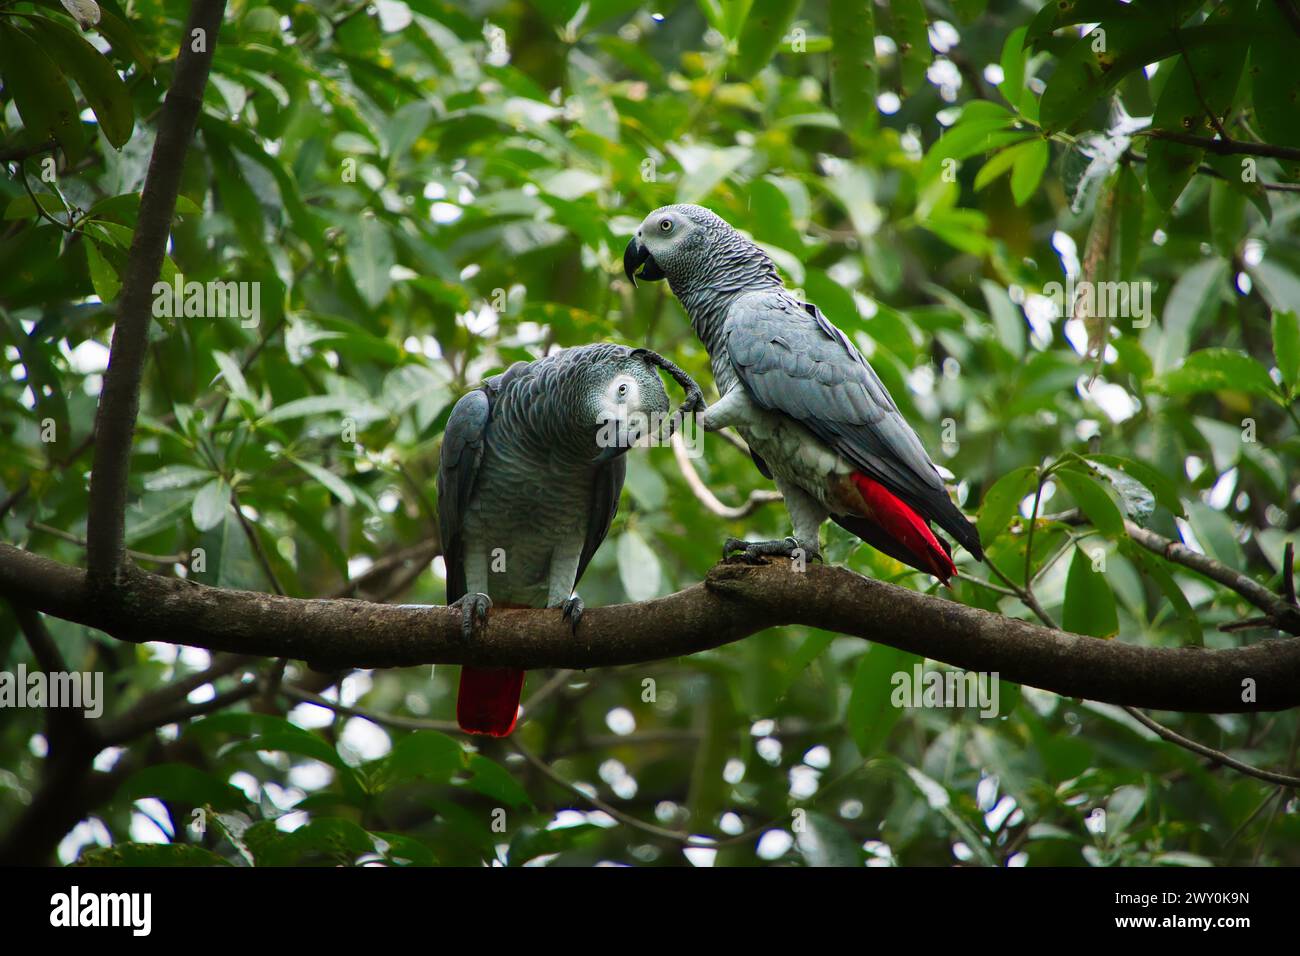 Two African Grey Parrots, also known as Congo Grey Parrot, perched on branch, scratching each other. Stock Photo